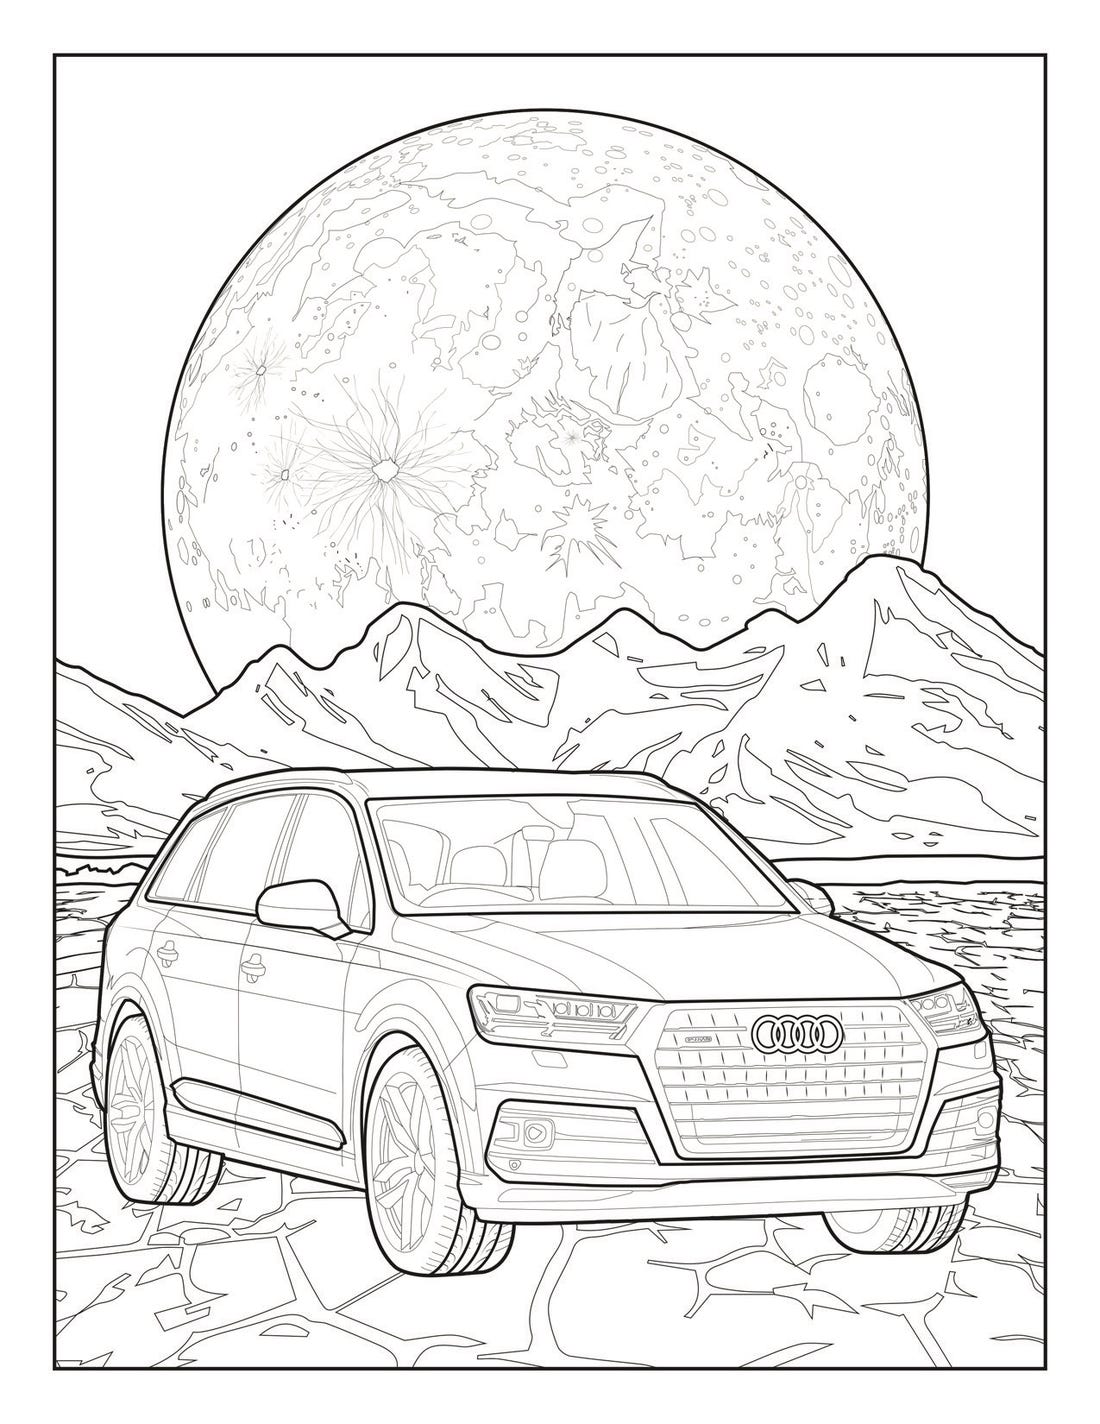 Audi and Mercedes release coloring pages to battle quarantine boredom